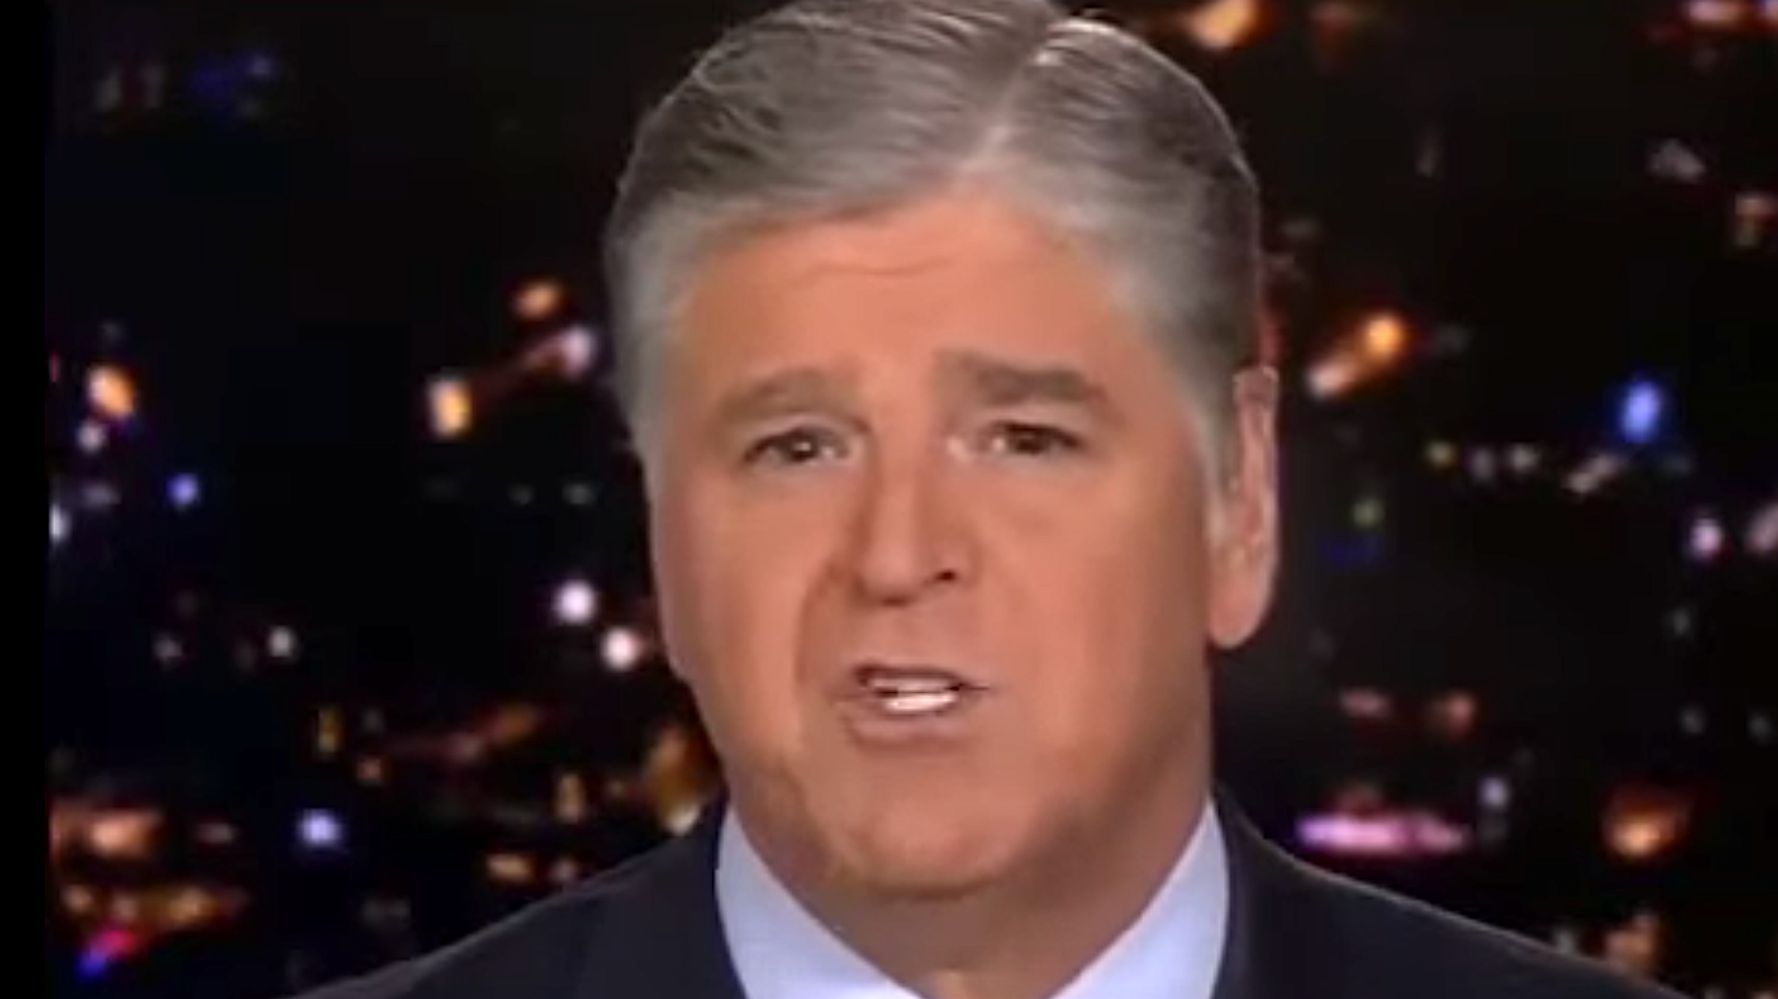 Sean Hannity’s Diatribe At Victorious Democrats Turns Into Stunning Self-Own